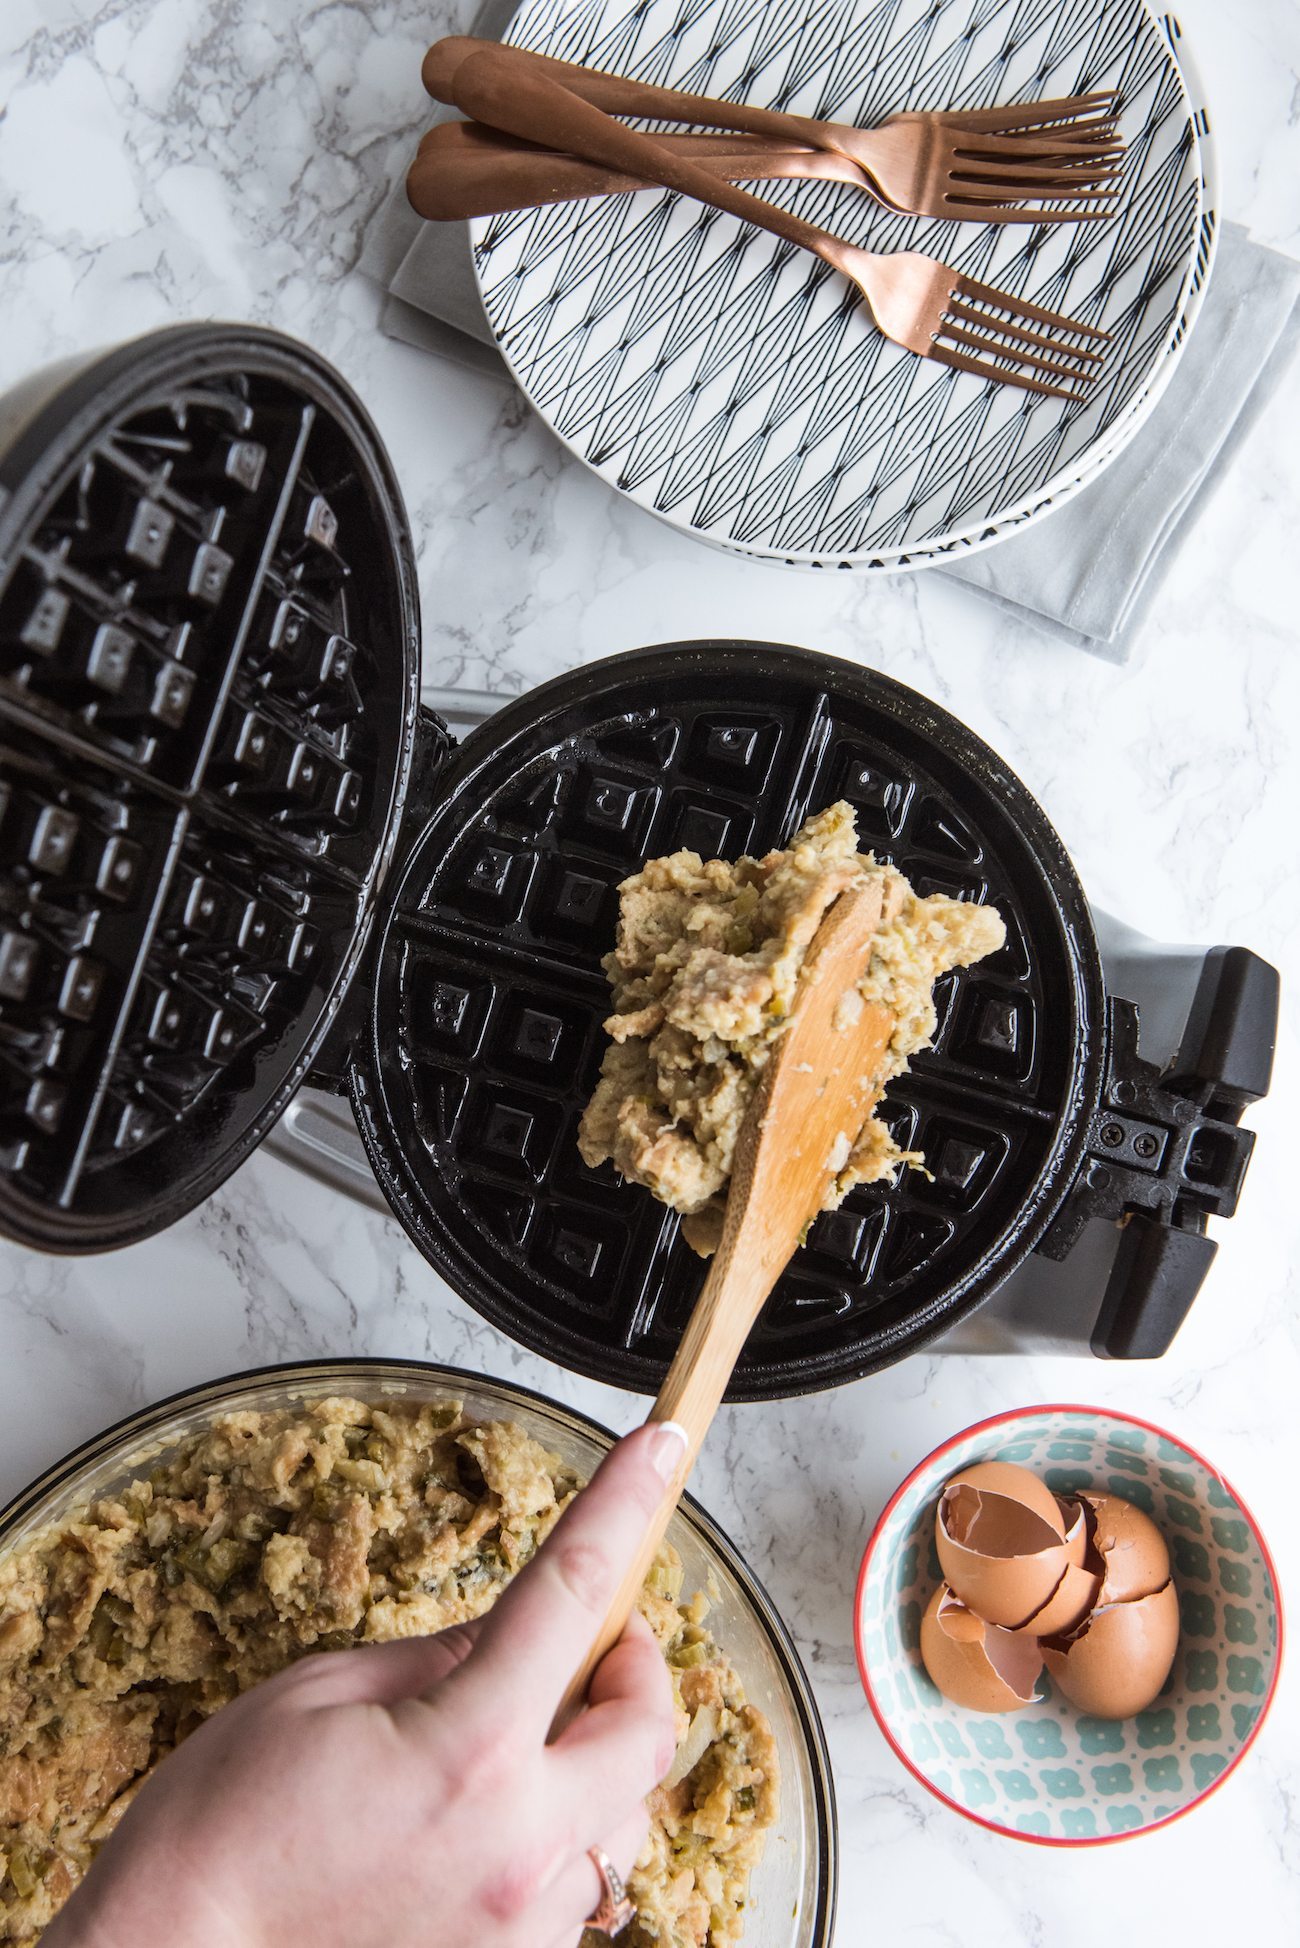 Leftover Stuffing Waffles Recipes | What to do with leftover stuffing, entertaining tips, party ideas, holiday party ideas and more from @cydconverse